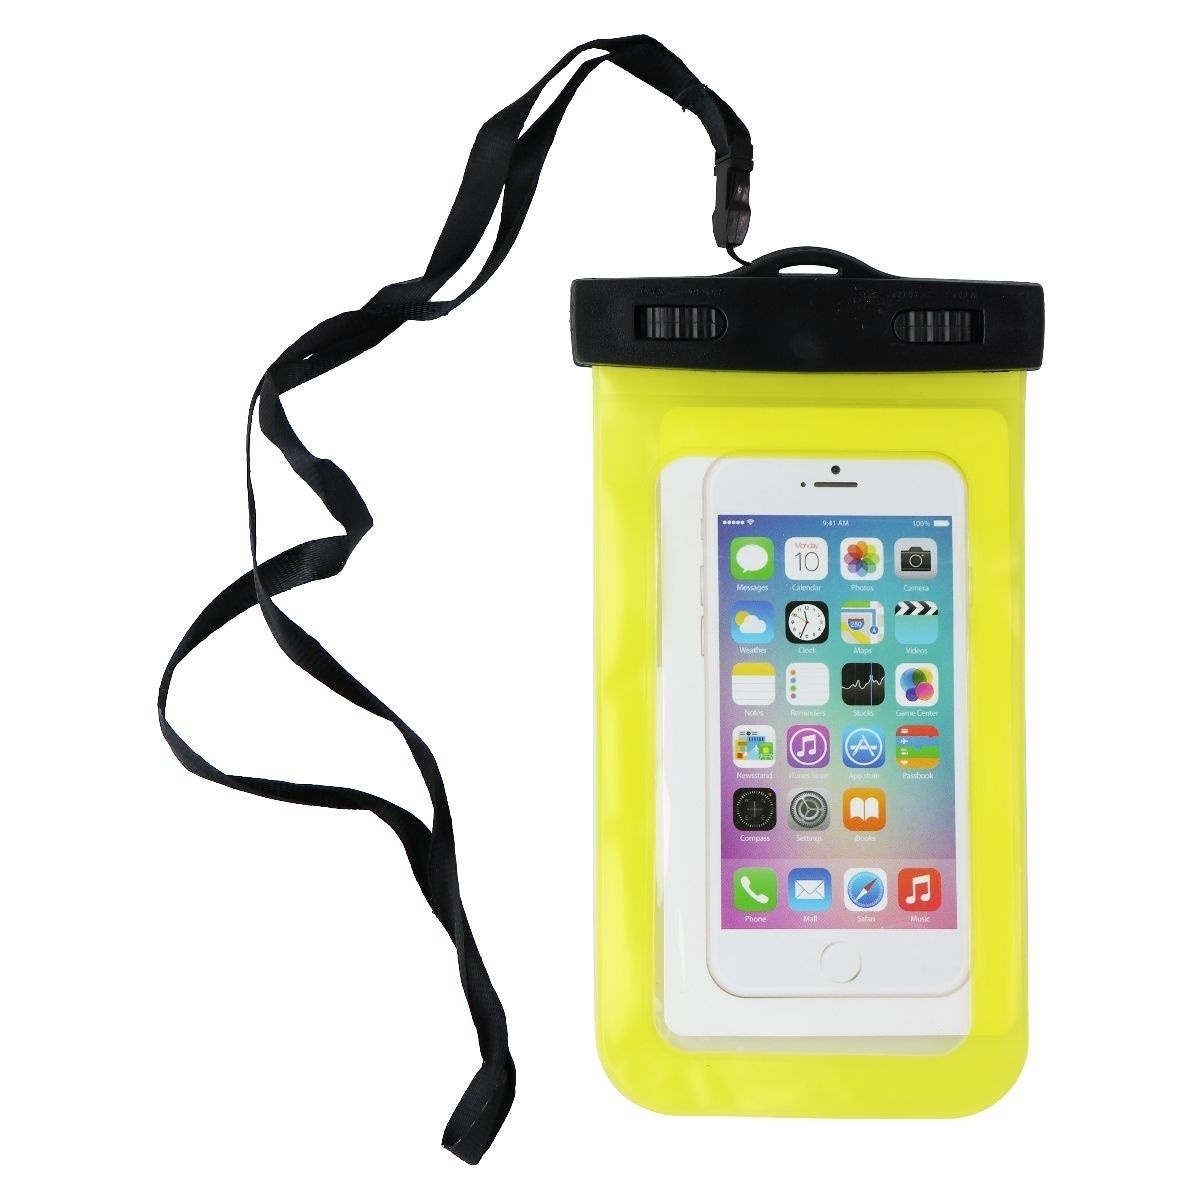 Universal Water Resistant Pouch For Smartphones With Carrying Cord - Yellow